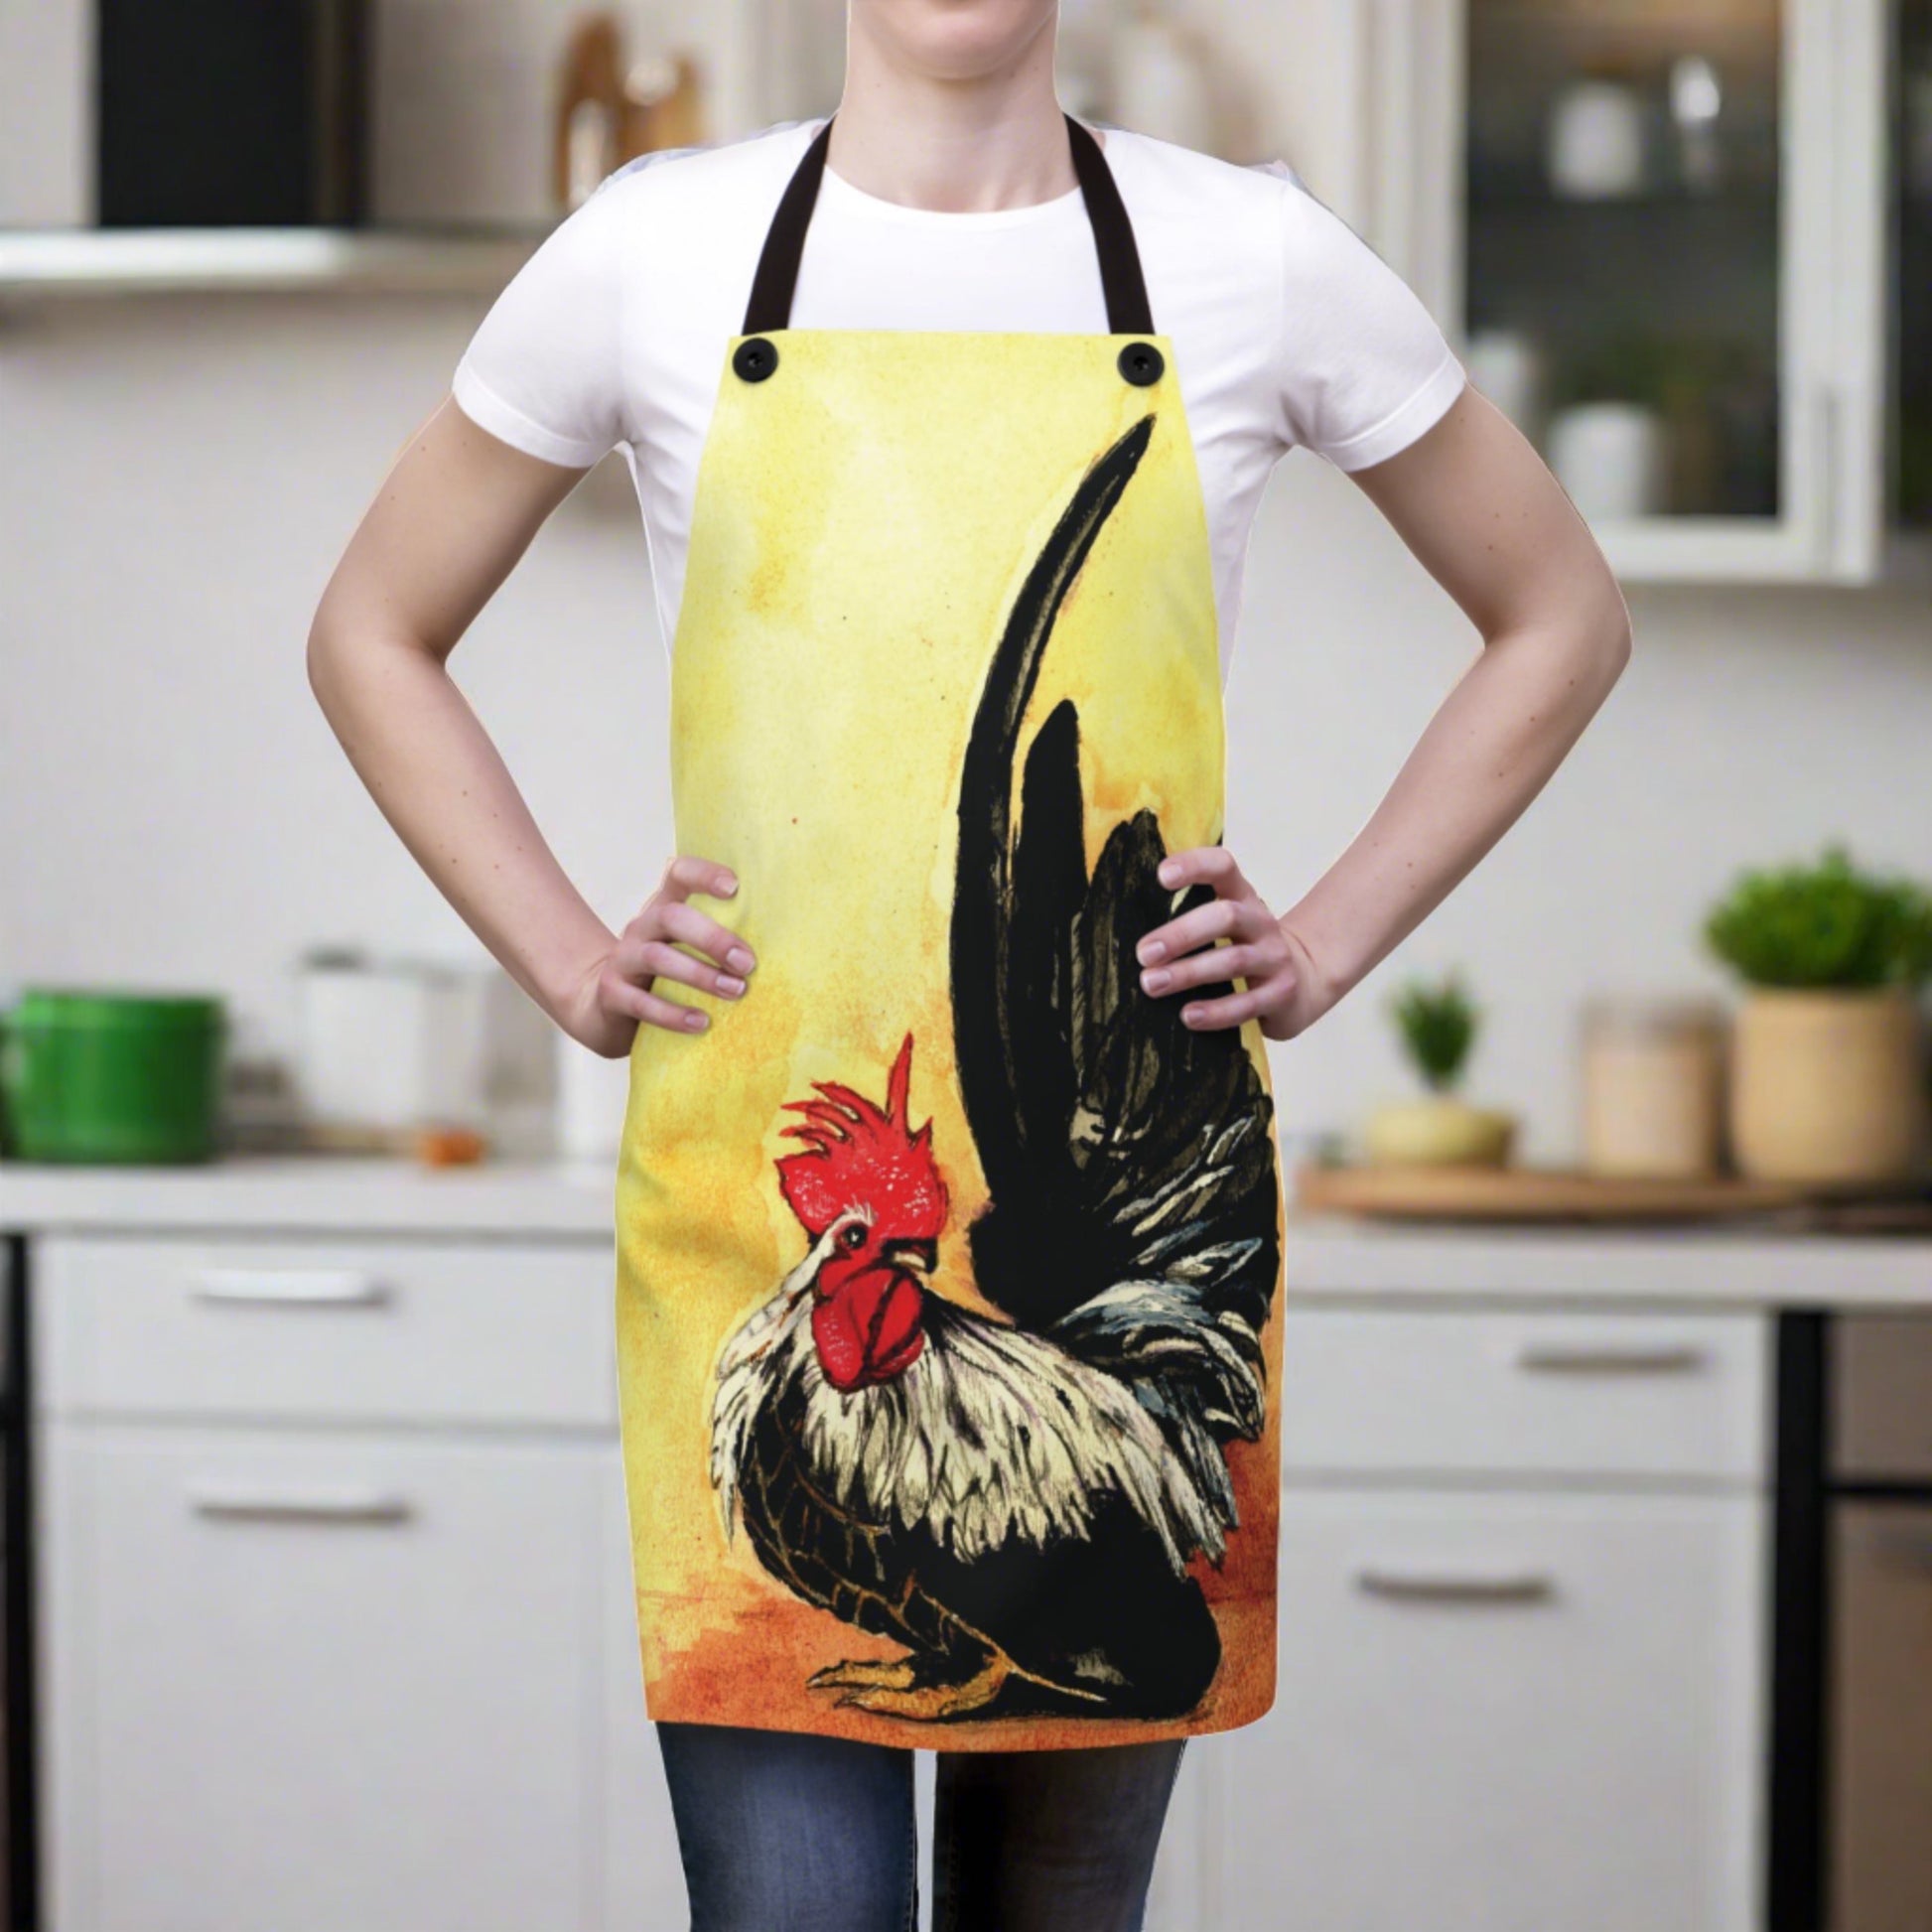 on a silky apron sits a watercolor design of Japanese Rooster in black & silvers with a bright red head with a yellow and orange background - apron has 4 straps that button on